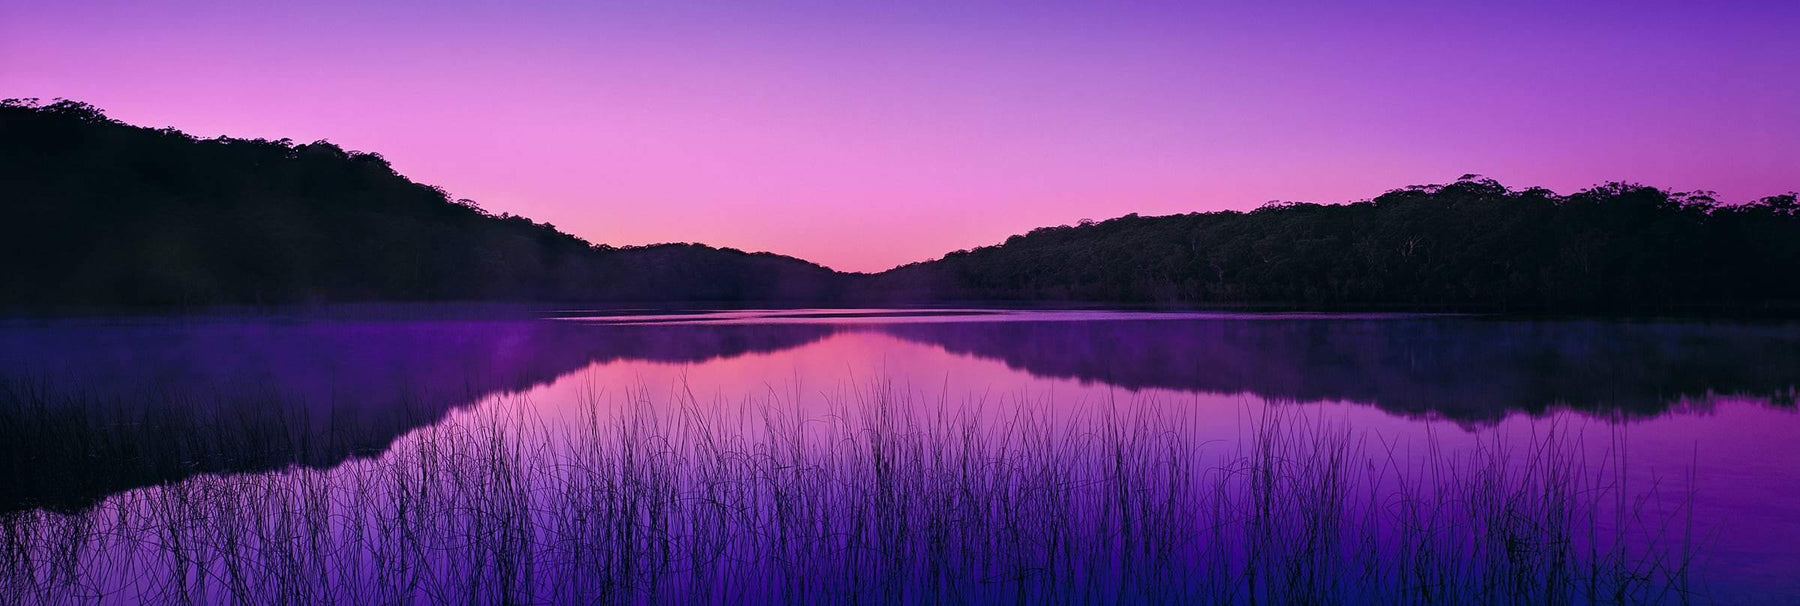 Reeds in the foreground of Lake McKenzie Australia surrounded by brush covered hills during a pink and purple sunrise